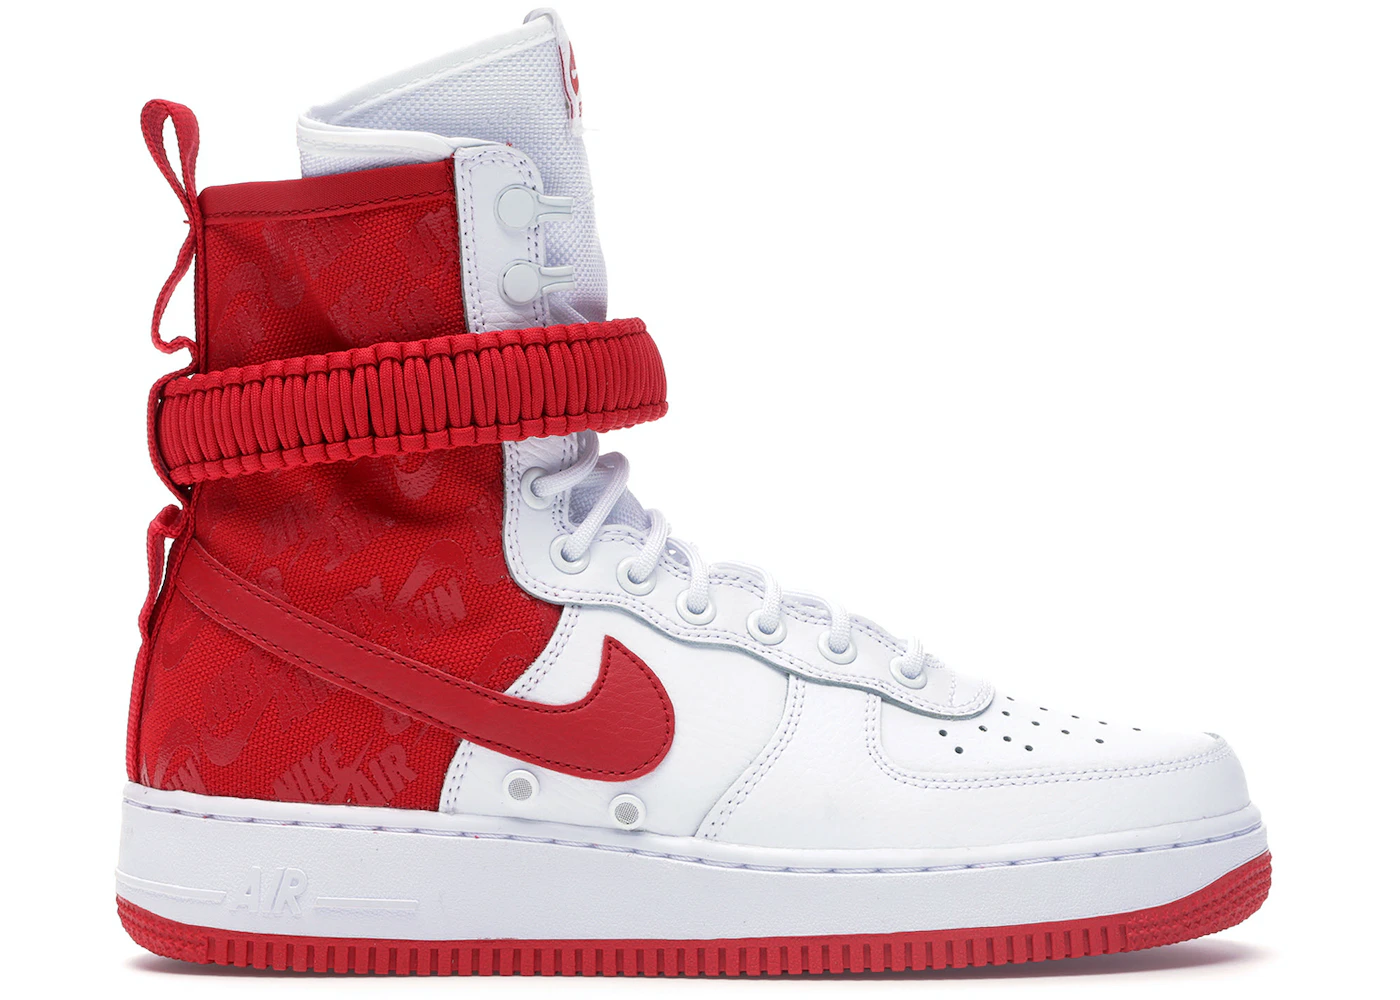 Nike SF Air Force 1 High White University Red - AR1955-100